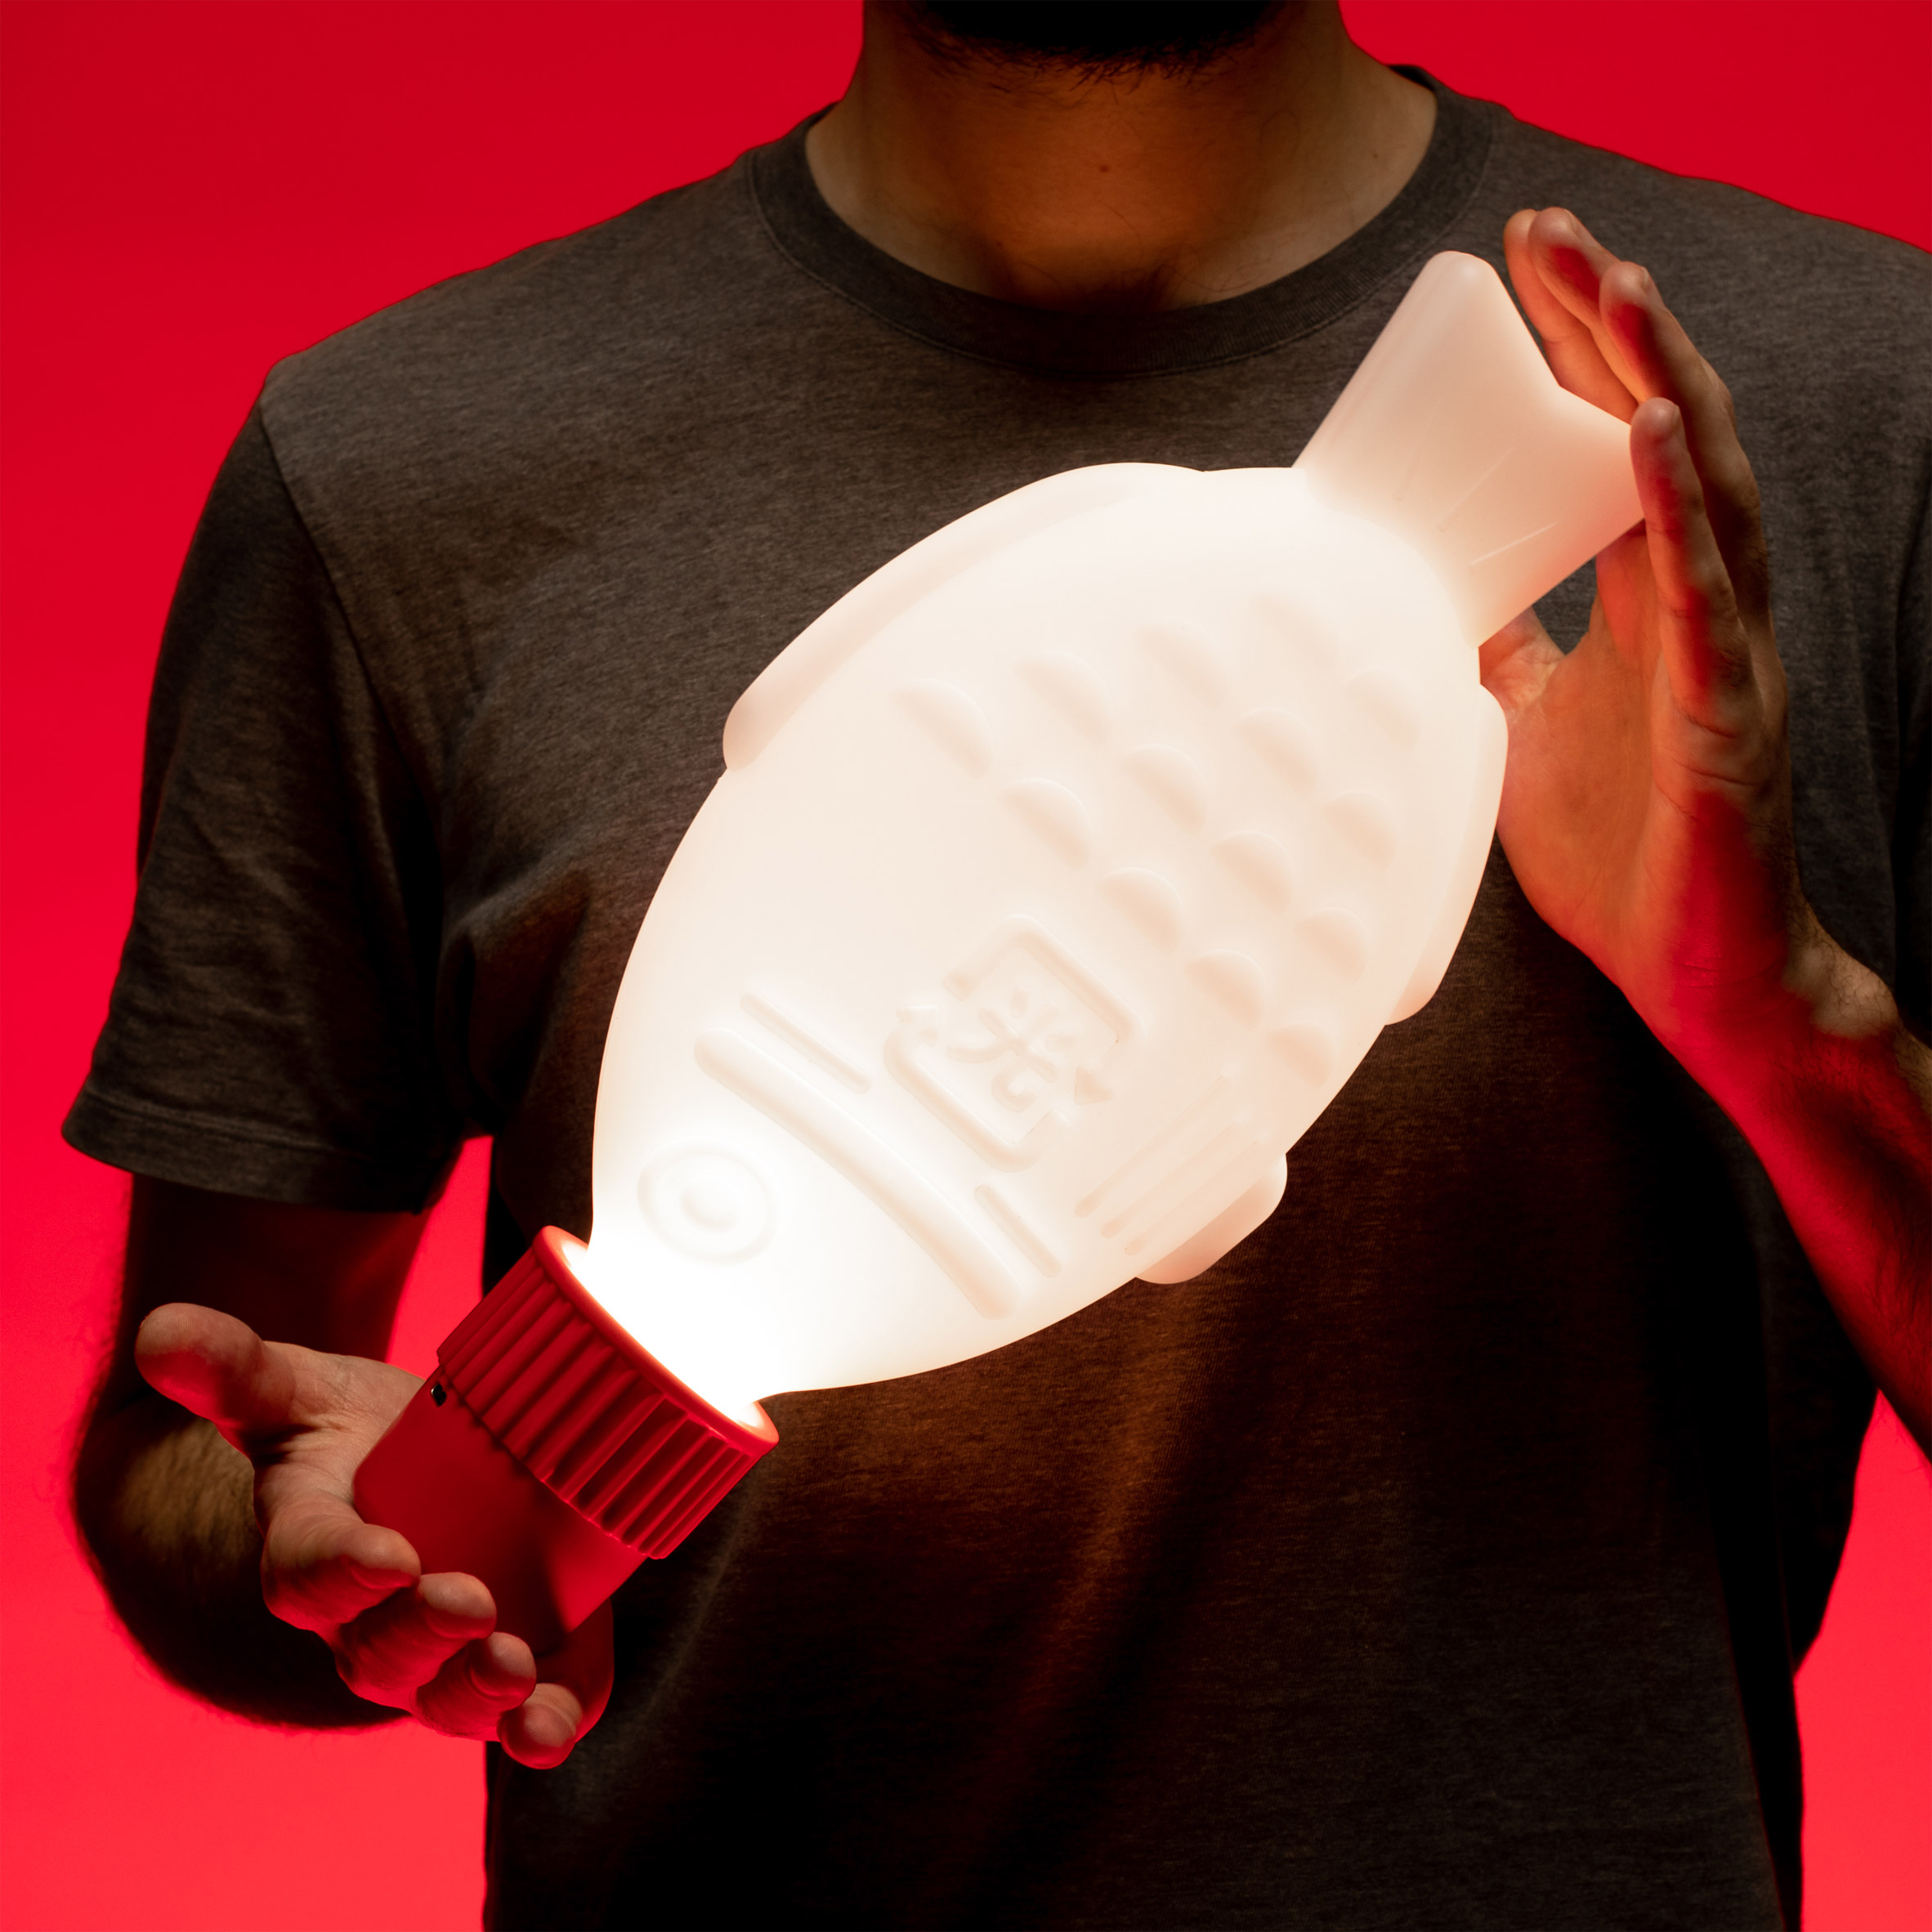 A photograph of Light Soy lamp being held